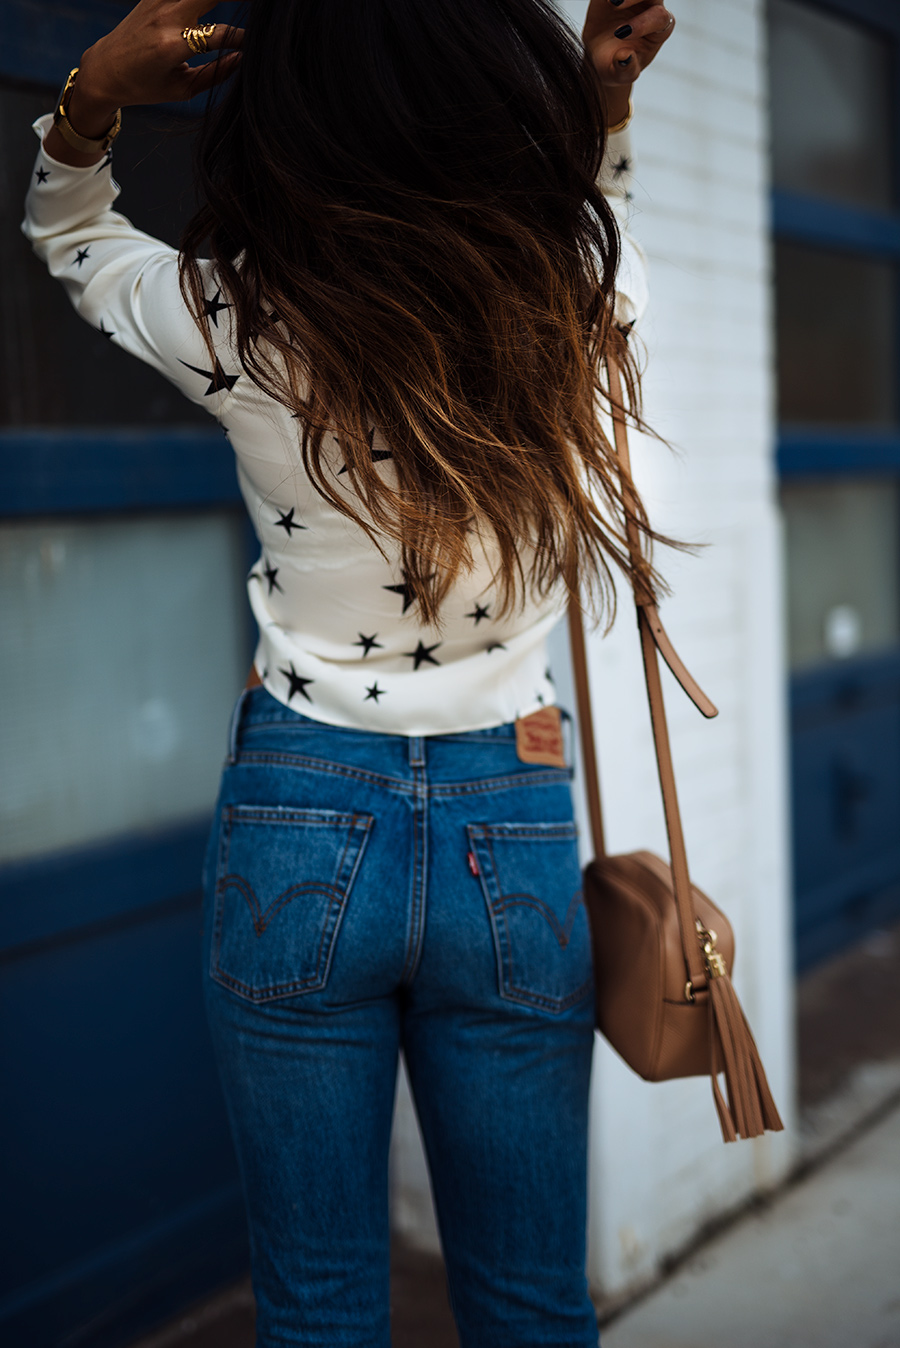 realisation par bianca star cropped top tie tops trend summer style outfit levis wedgie gucci bag not your standard fashion outfit blogger kayla seah not your standard blogger blog fashion